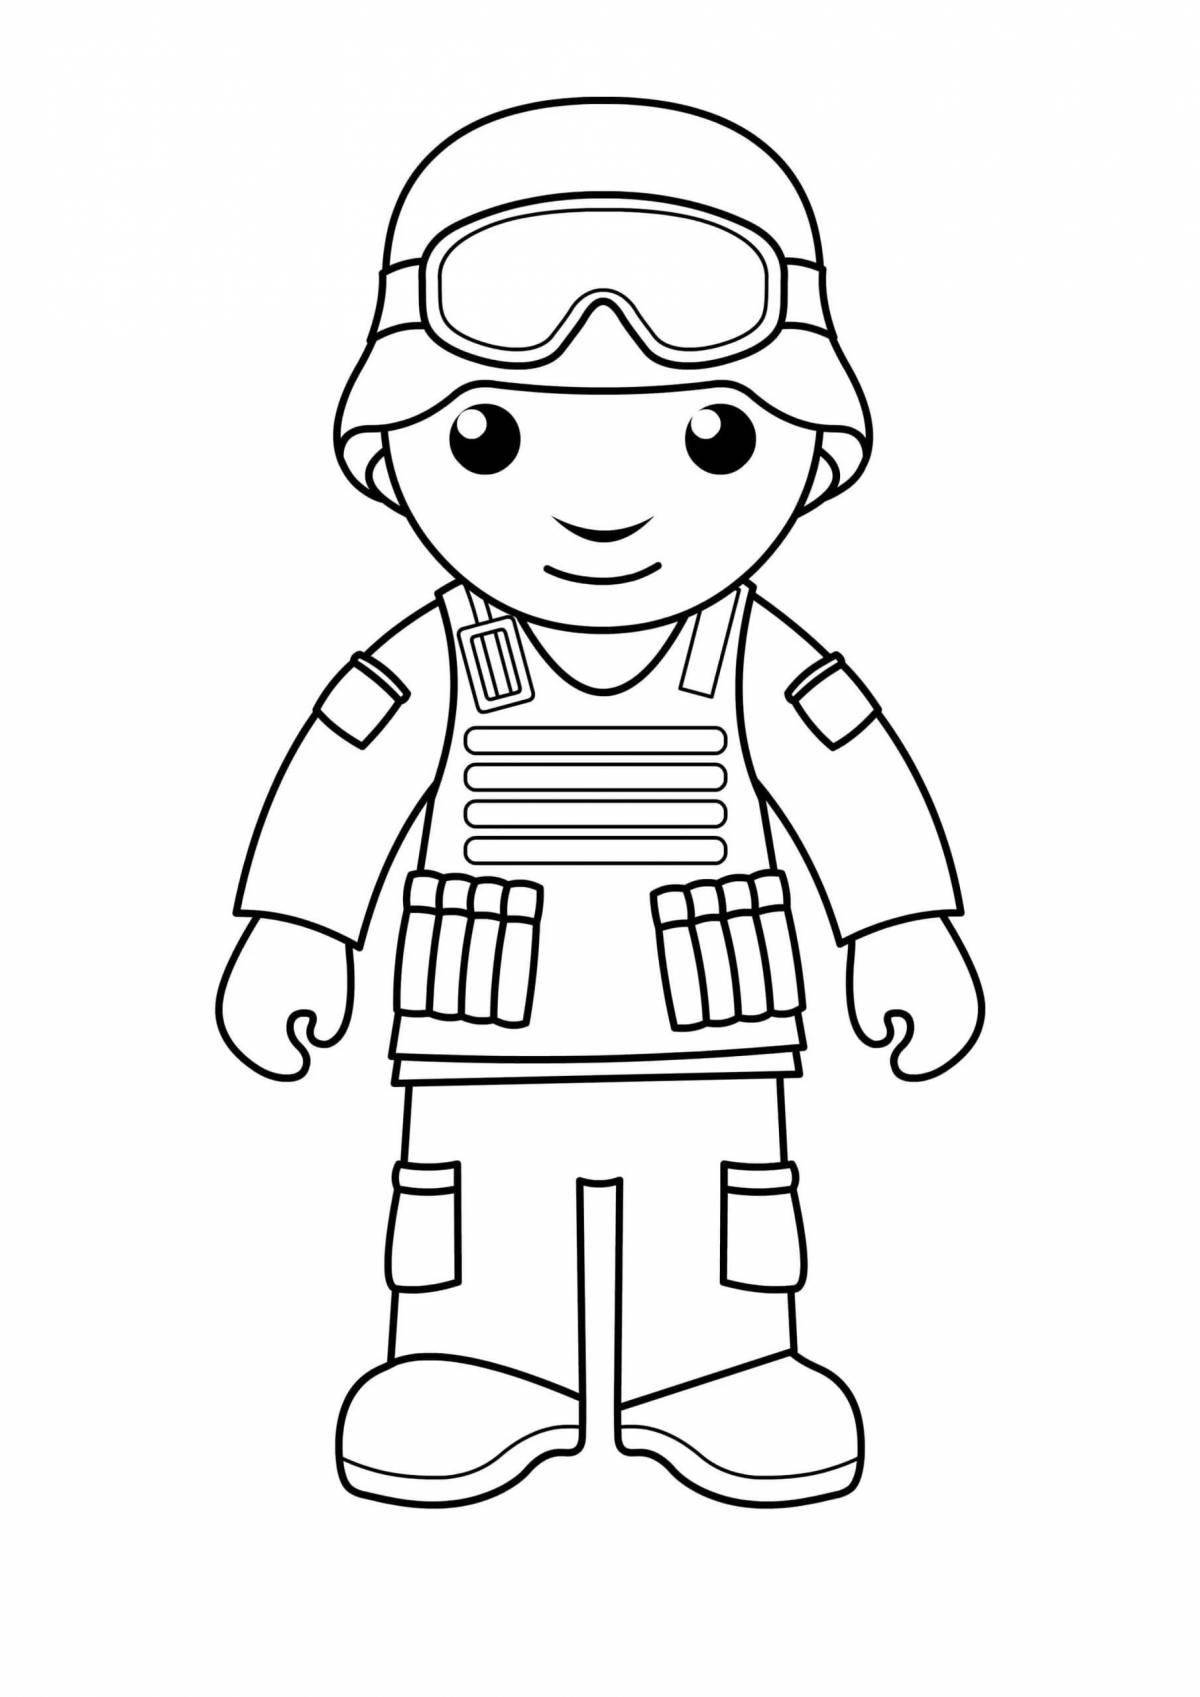 Shock soldier coloring page